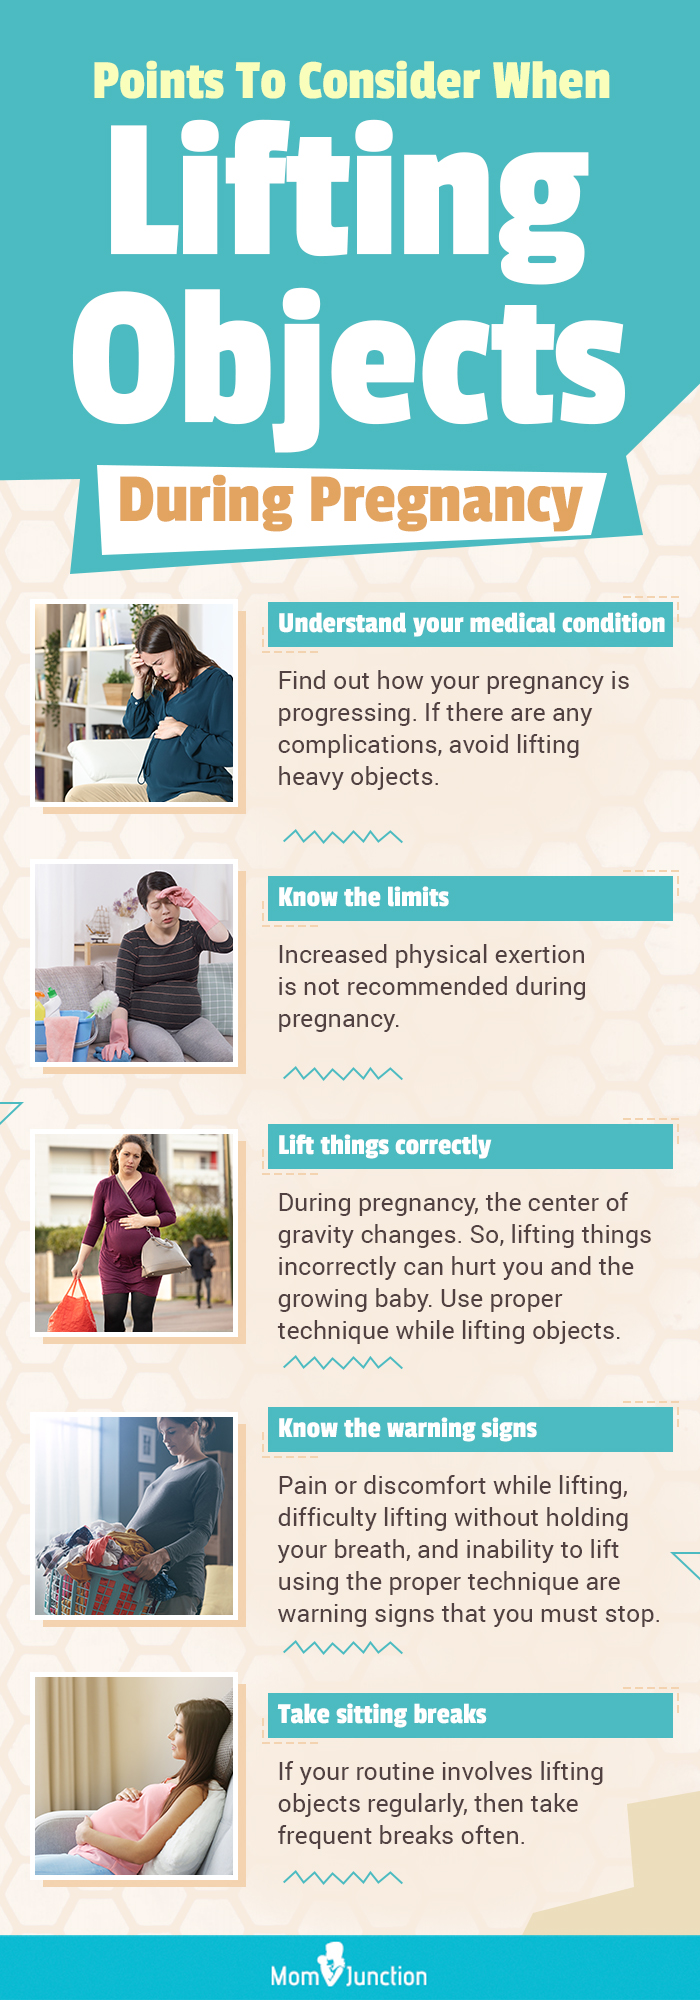 points to consider when lifting objects during pregnancy (infographic)